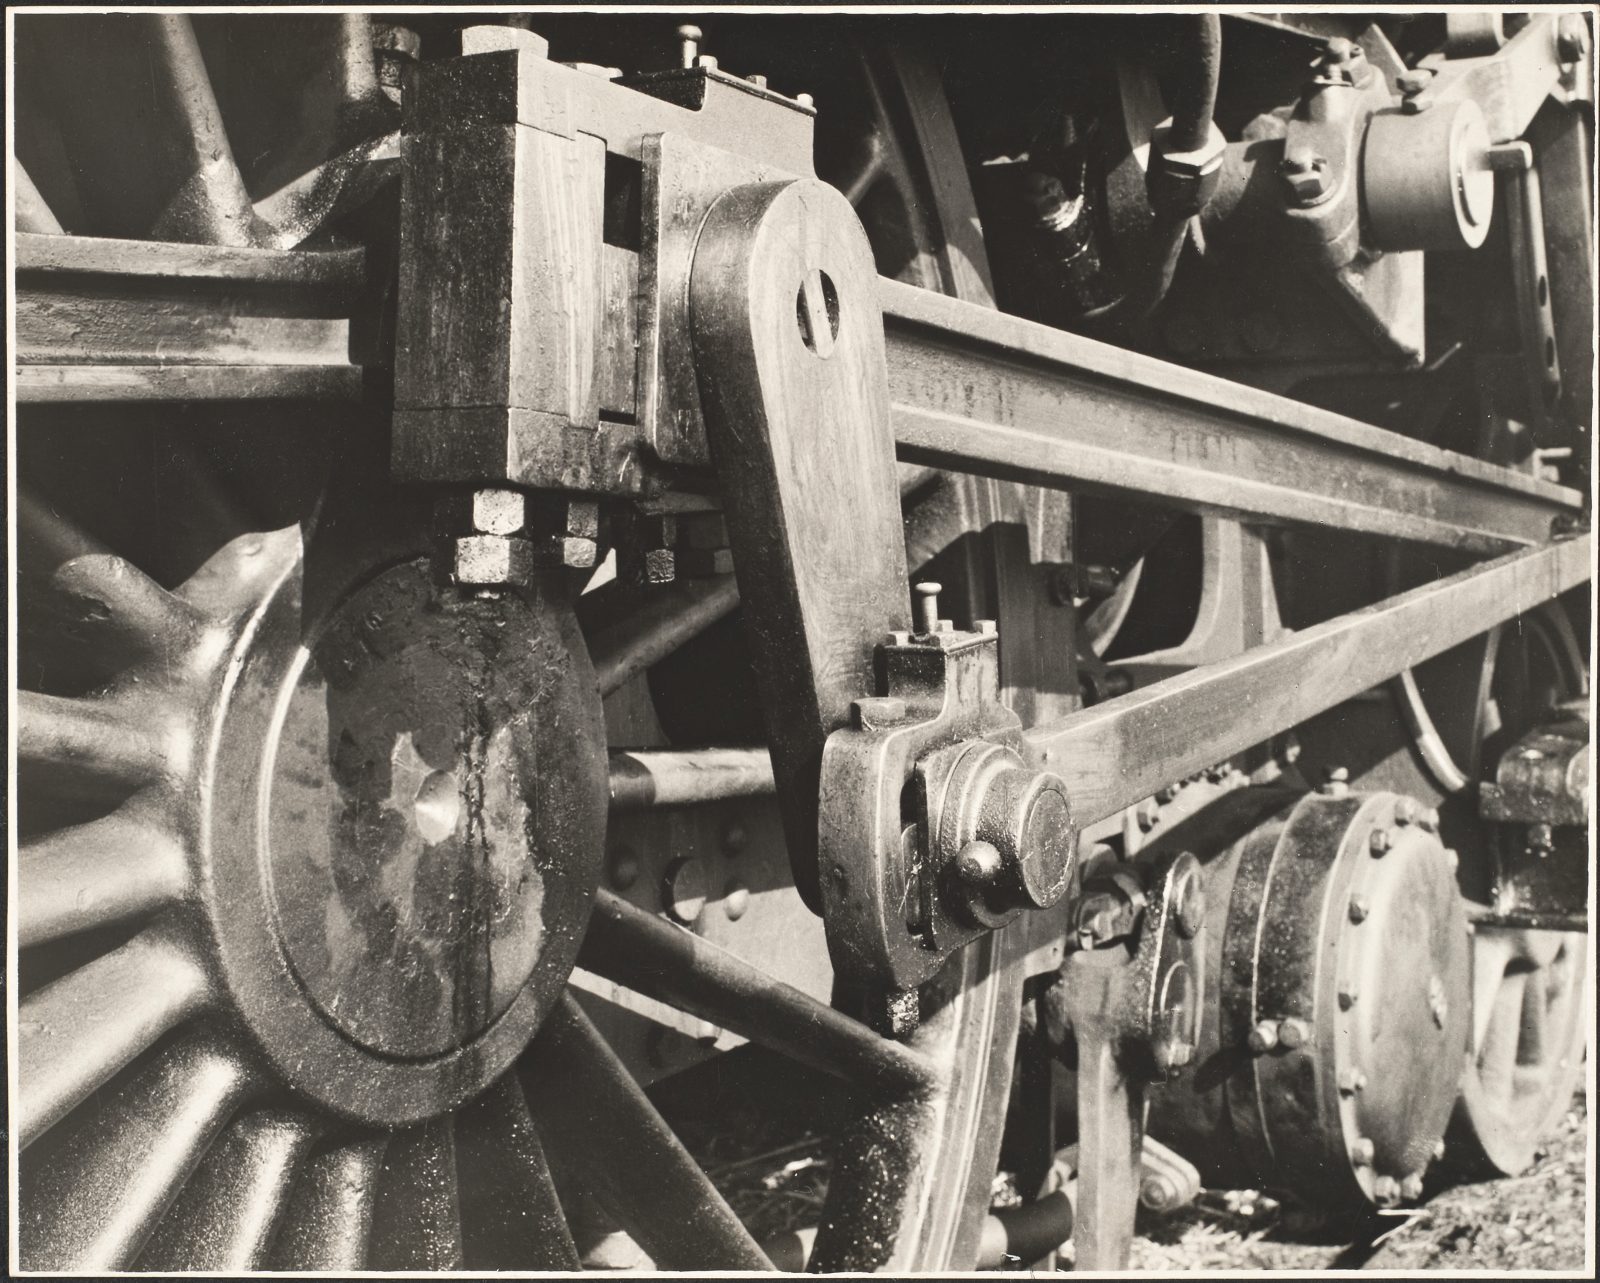 A close-up photograph of a train engine